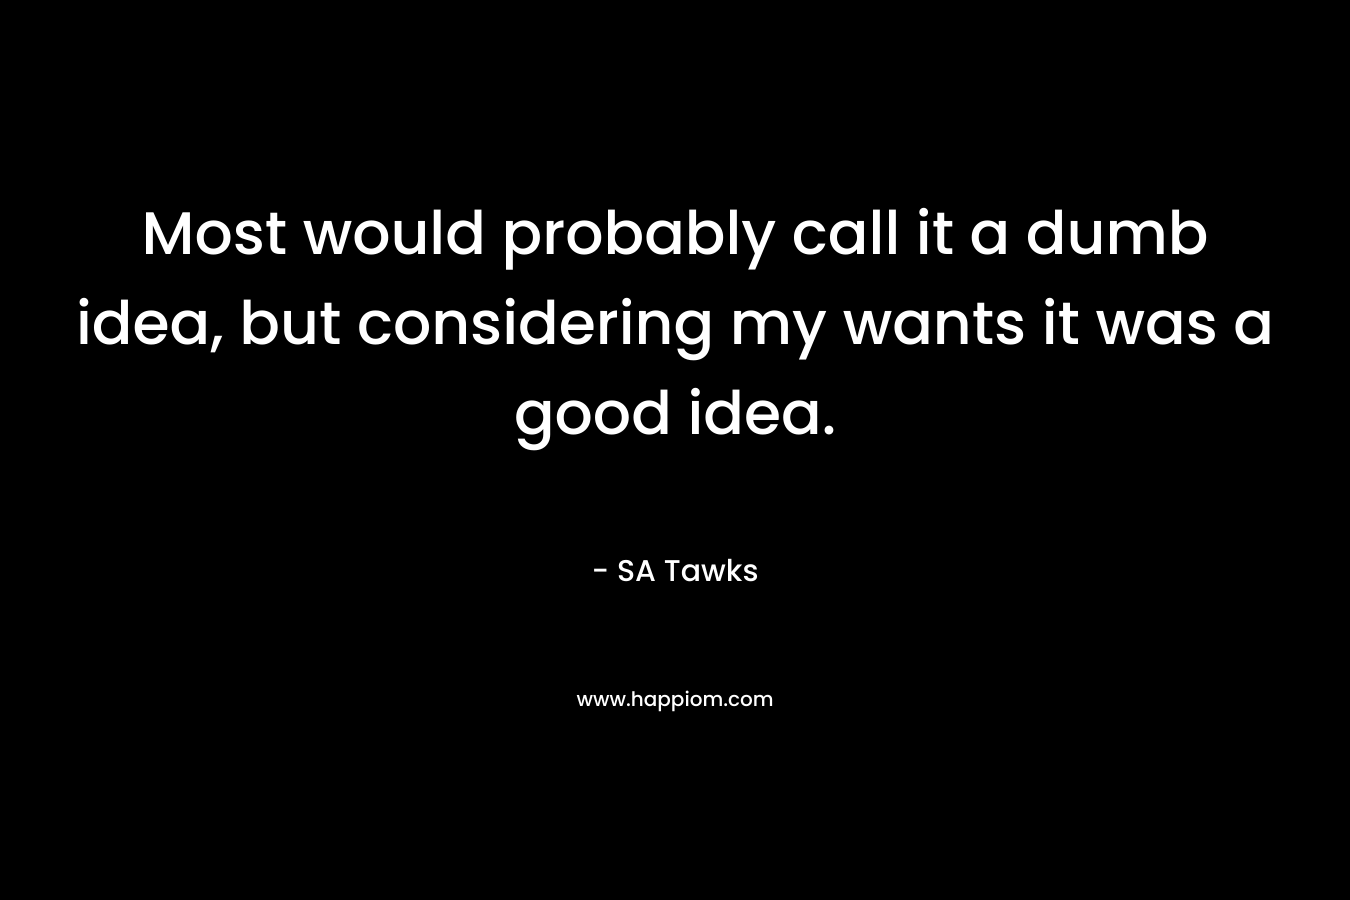 Most would probably call it a dumb idea, but considering my wants it was a good idea. – SA Tawks